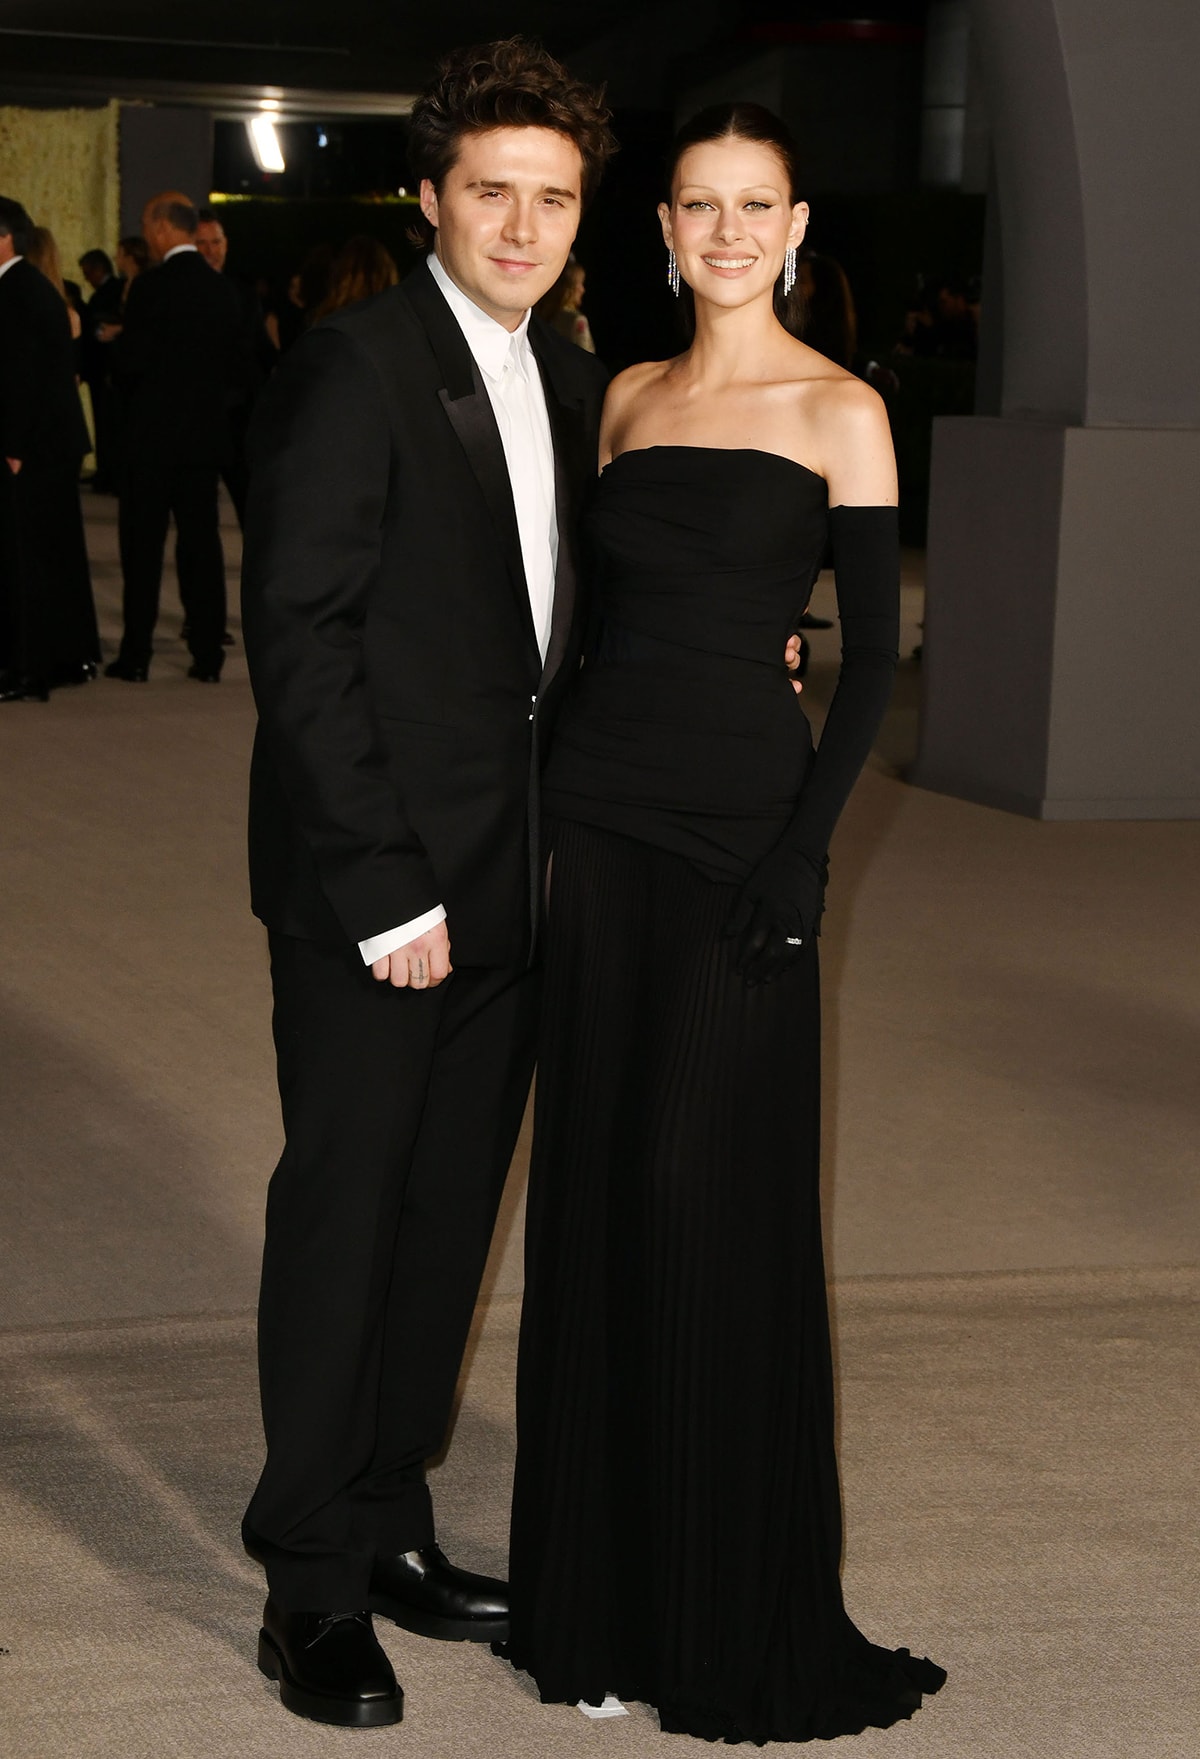 Brooklyn Beckham coordinates with wife Nicola Peltz, who dons a strapless black Givenchy gown with opera gloves